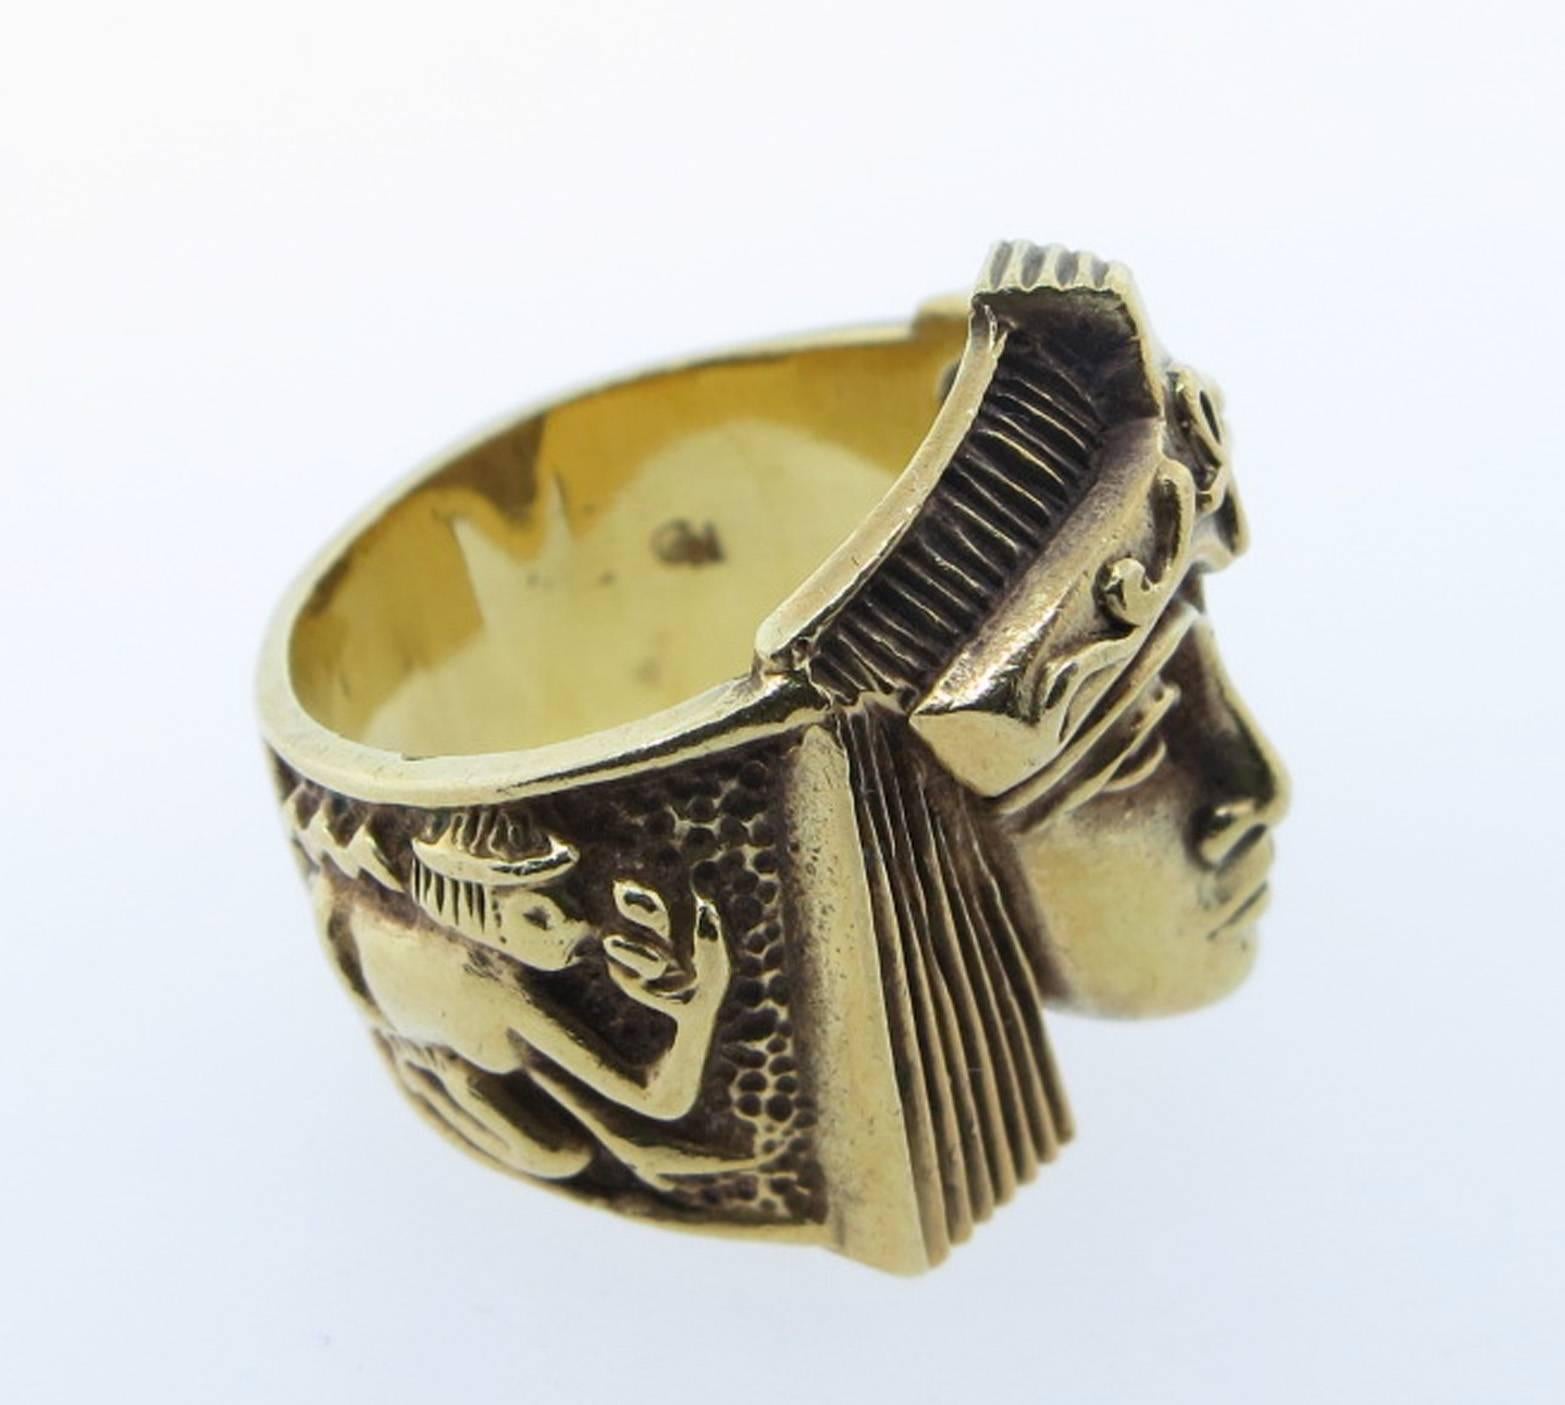 Sculptural 18kt. yellow gold Egyptian revival head ring in fine detail and richly patinated. Size 6 1/2 and can be sized.
